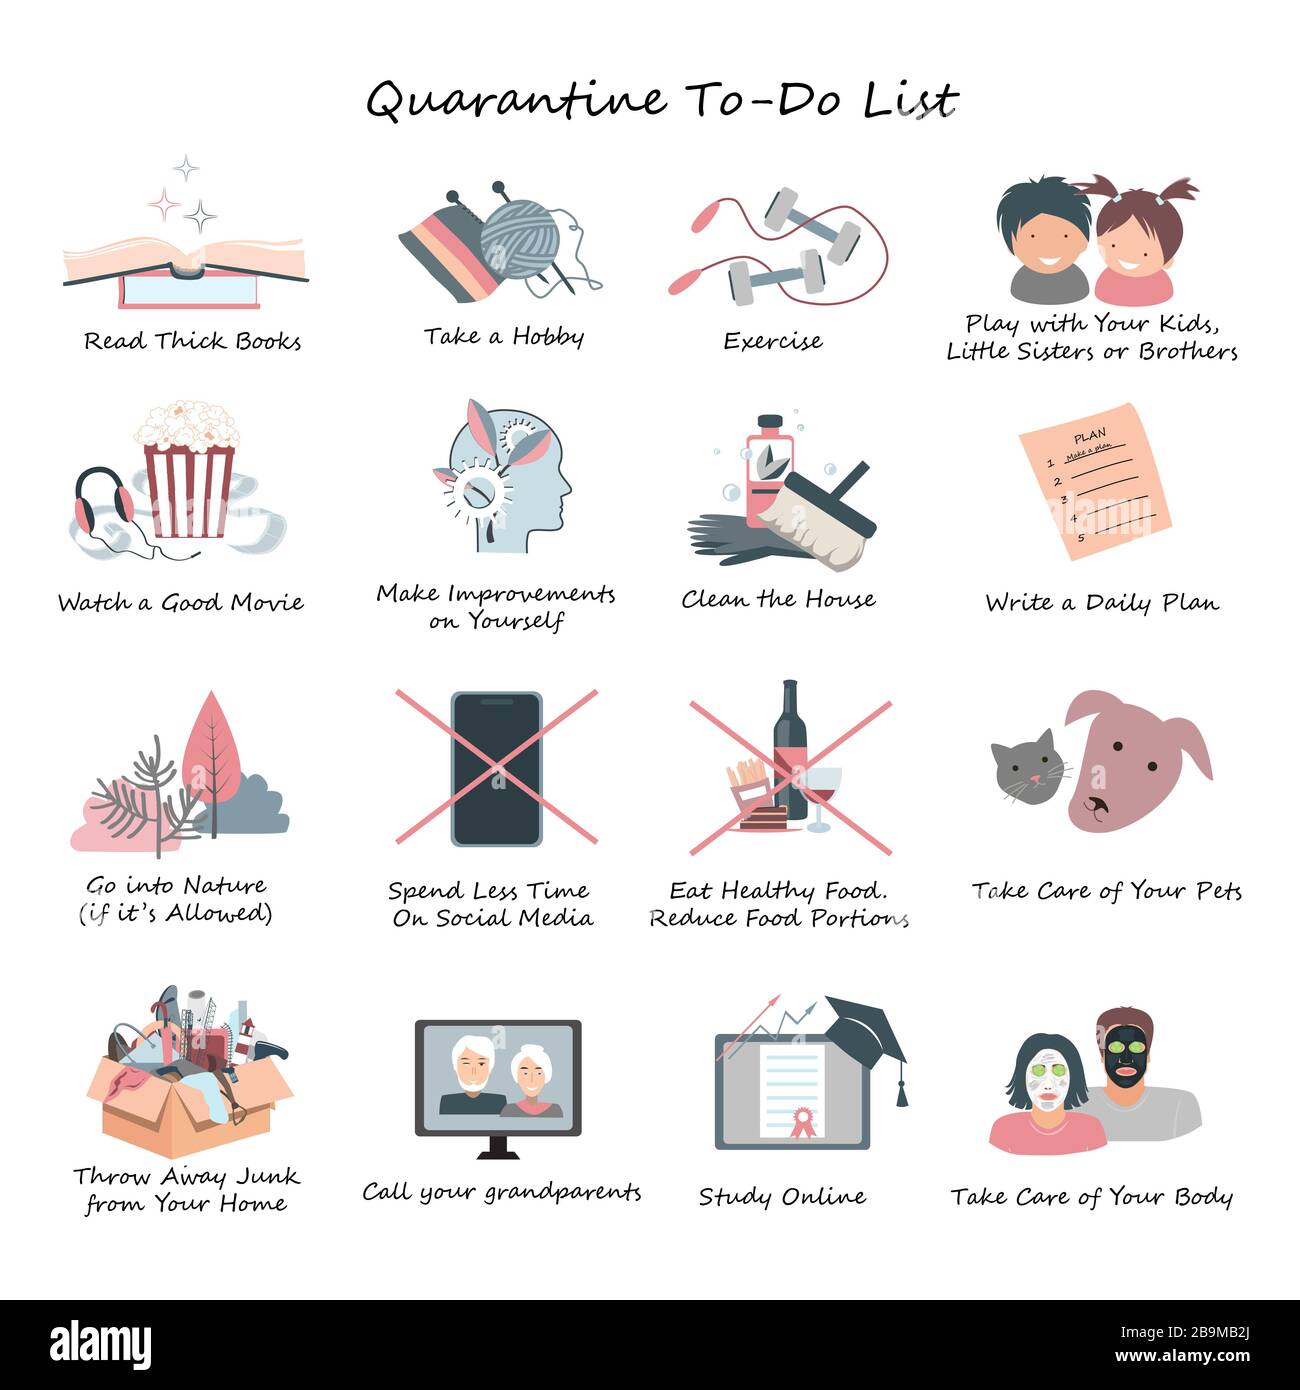 List of Daily Activities for Covid or coronavirus quarantine. Stay at Home concept, daily routine while Self Isolation. Vector infographic isolated on Stock Vector